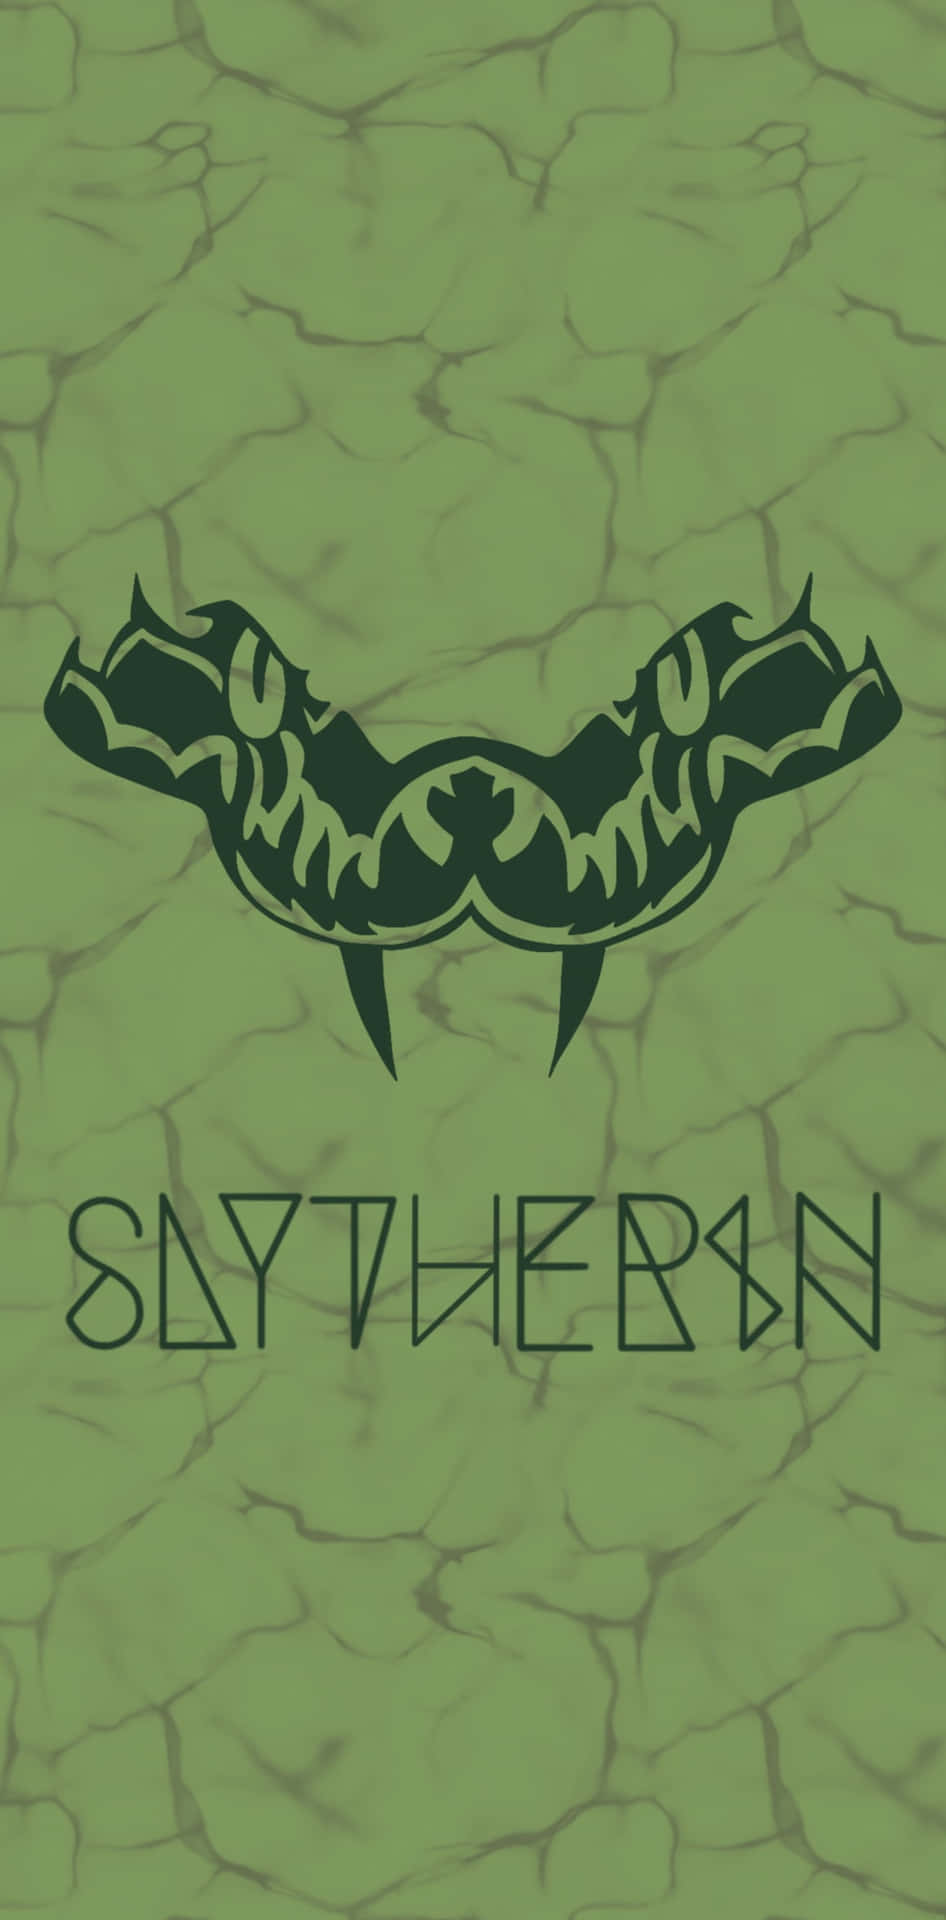 The Pride of Slytherin